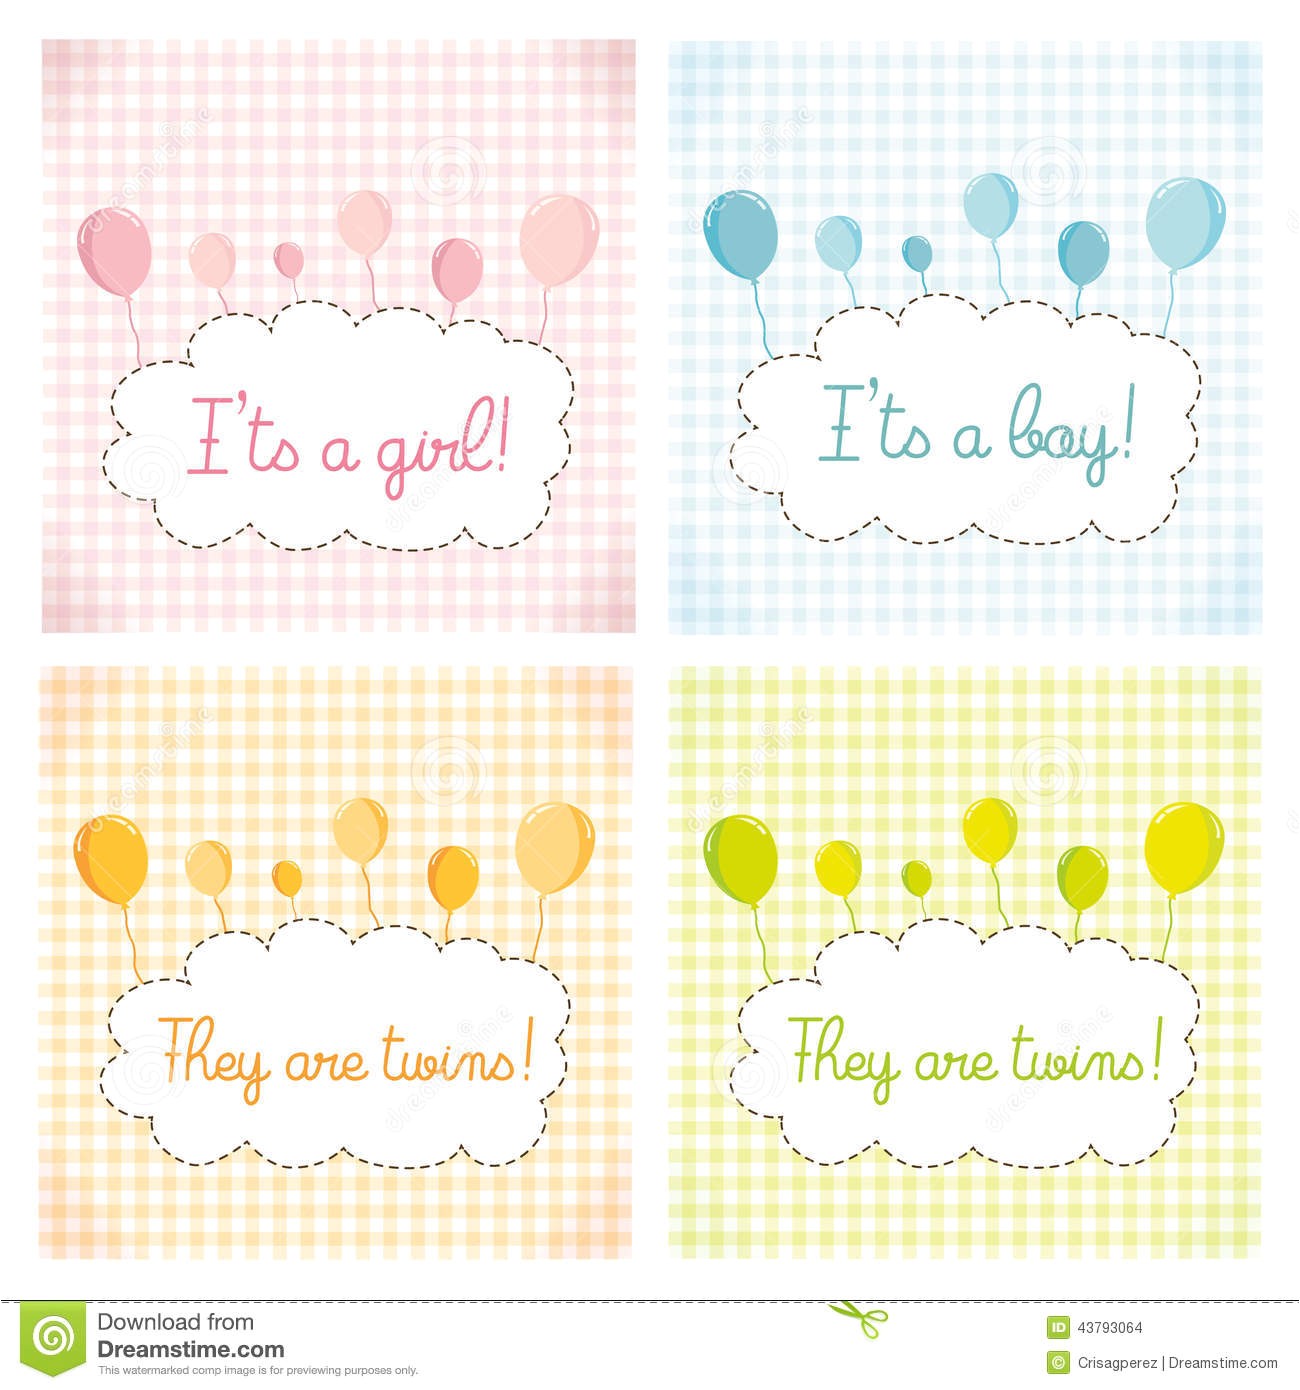 top 11 packs of baby shower invitations trends in 2016